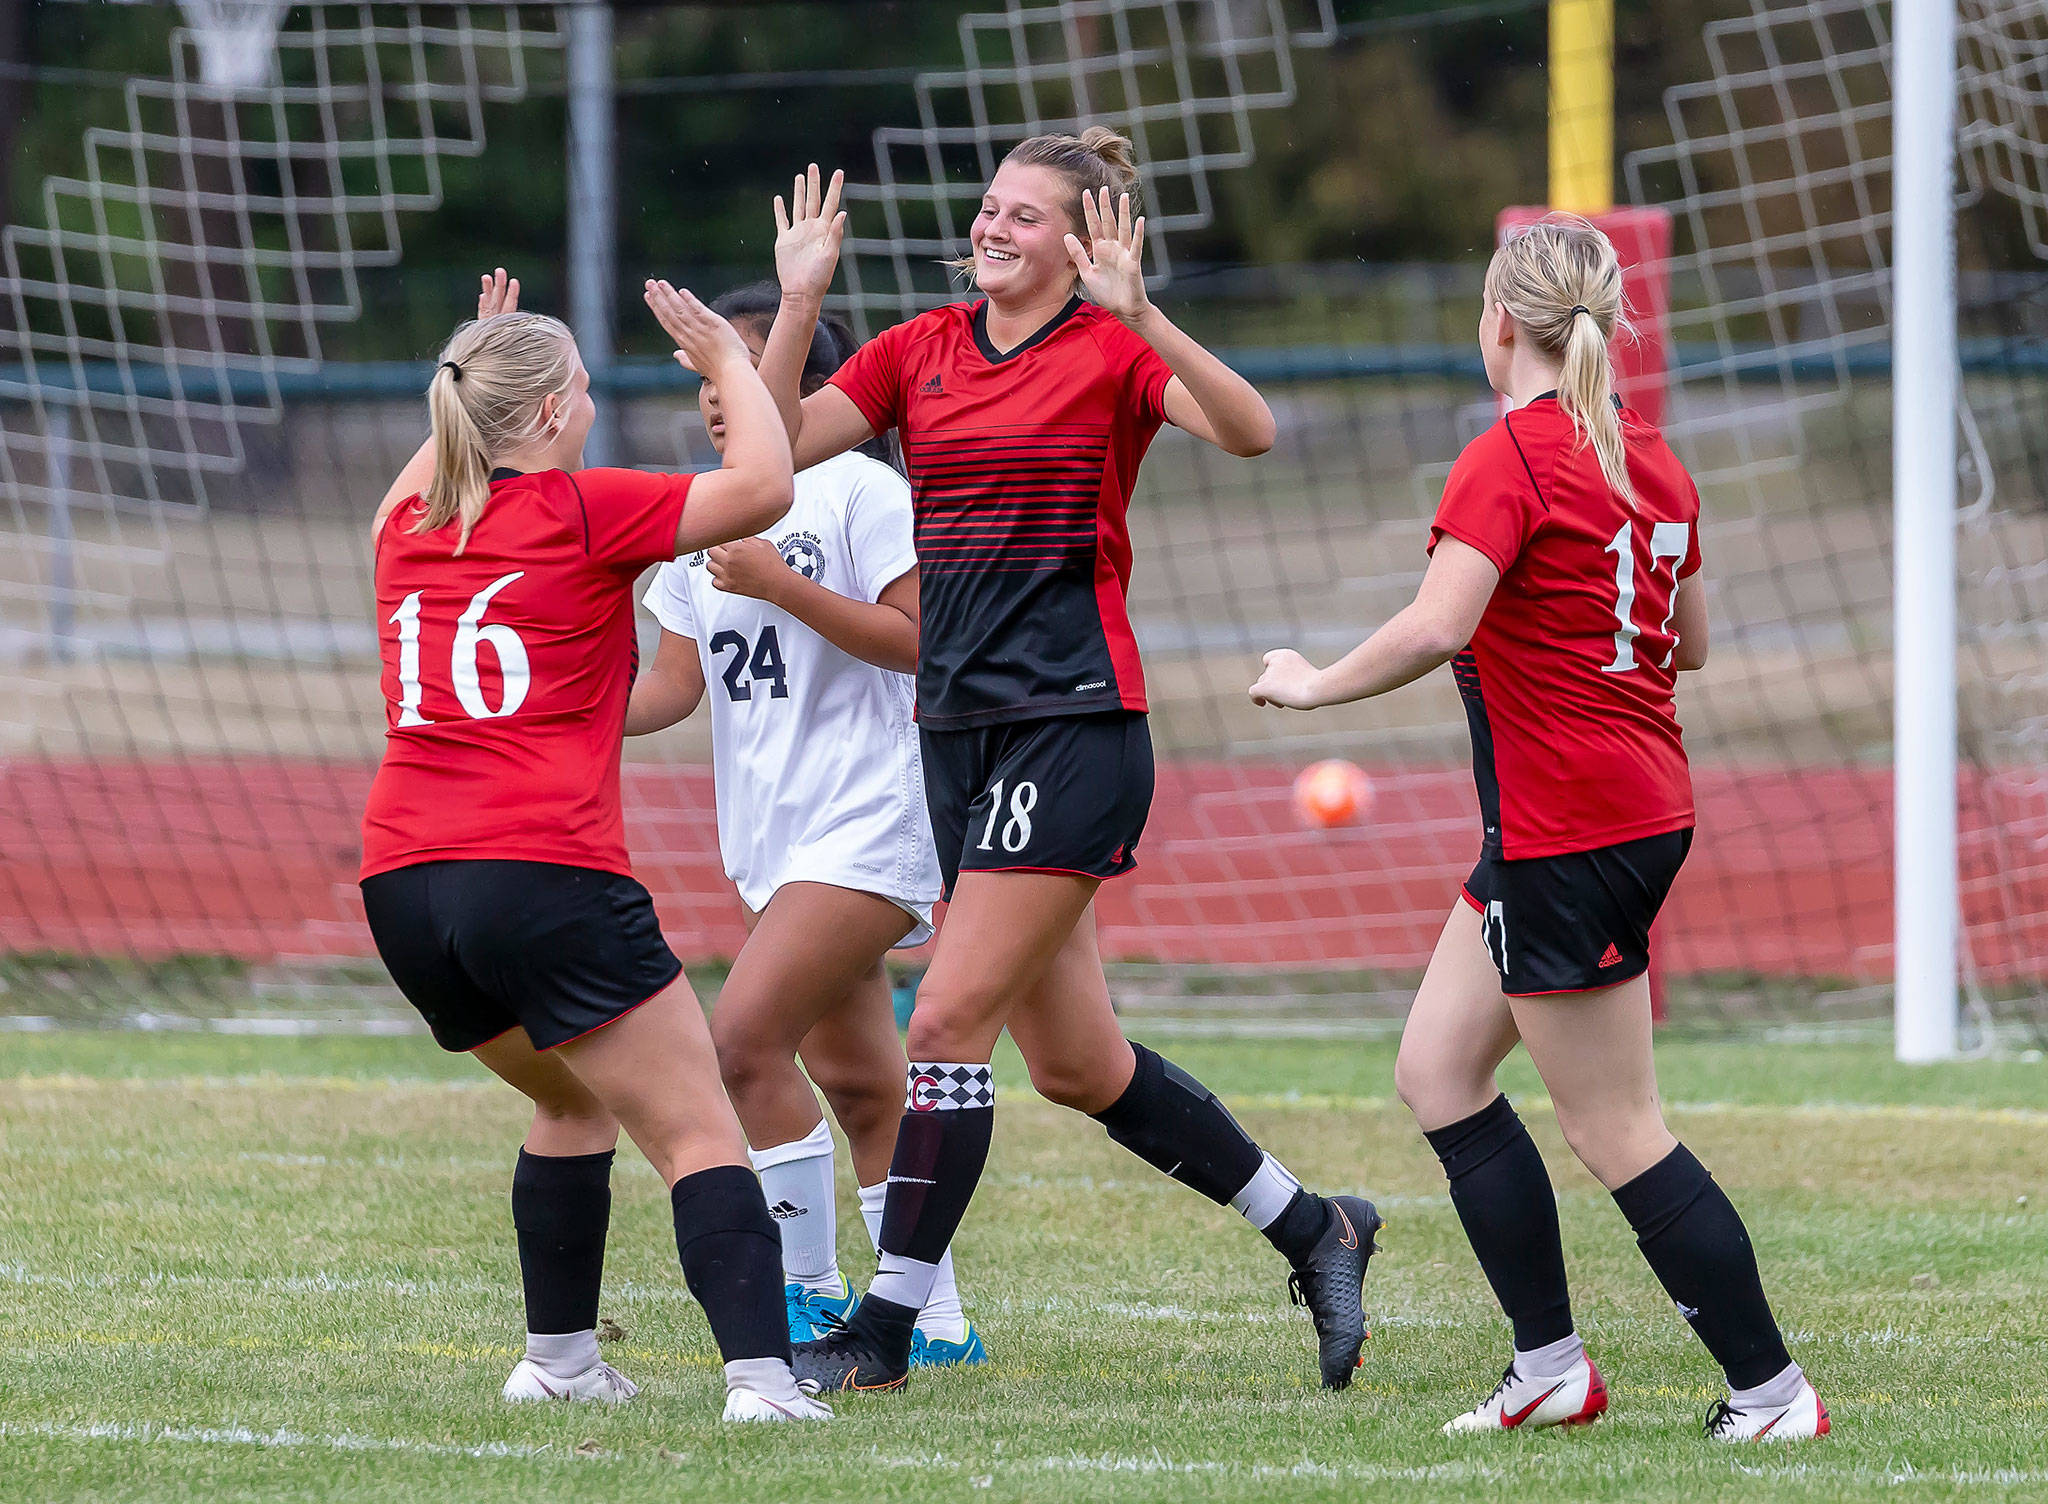 Avalon Renninger (16), Lindsey Roberts (18) and Audrianna Shaw (17) celebrate a Coupeville goal. (Photo by John Fisken)